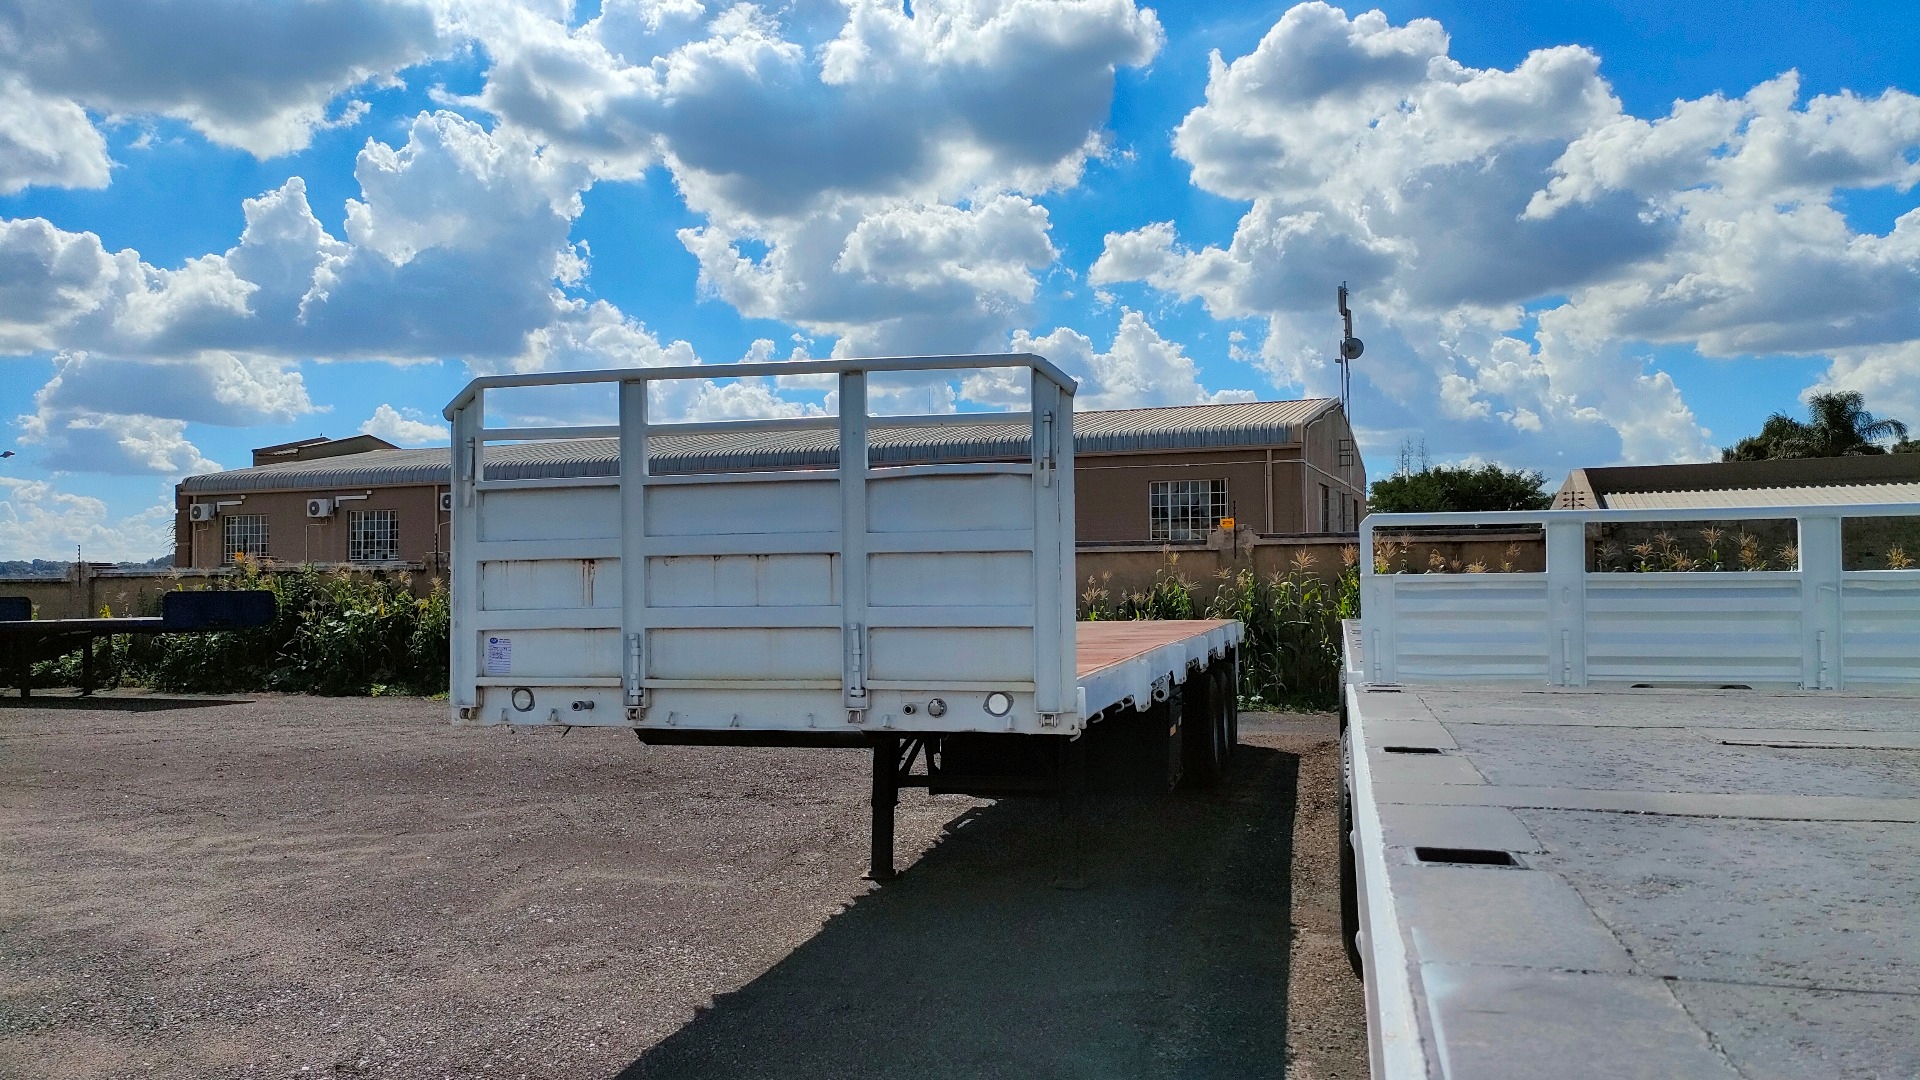 TDM Tri-Axle trailers CTS 13m Triaxle Flatdeck Trailer Container Locks 1995 for sale by A2Z Trucks | Truck & Trailer Marketplaces